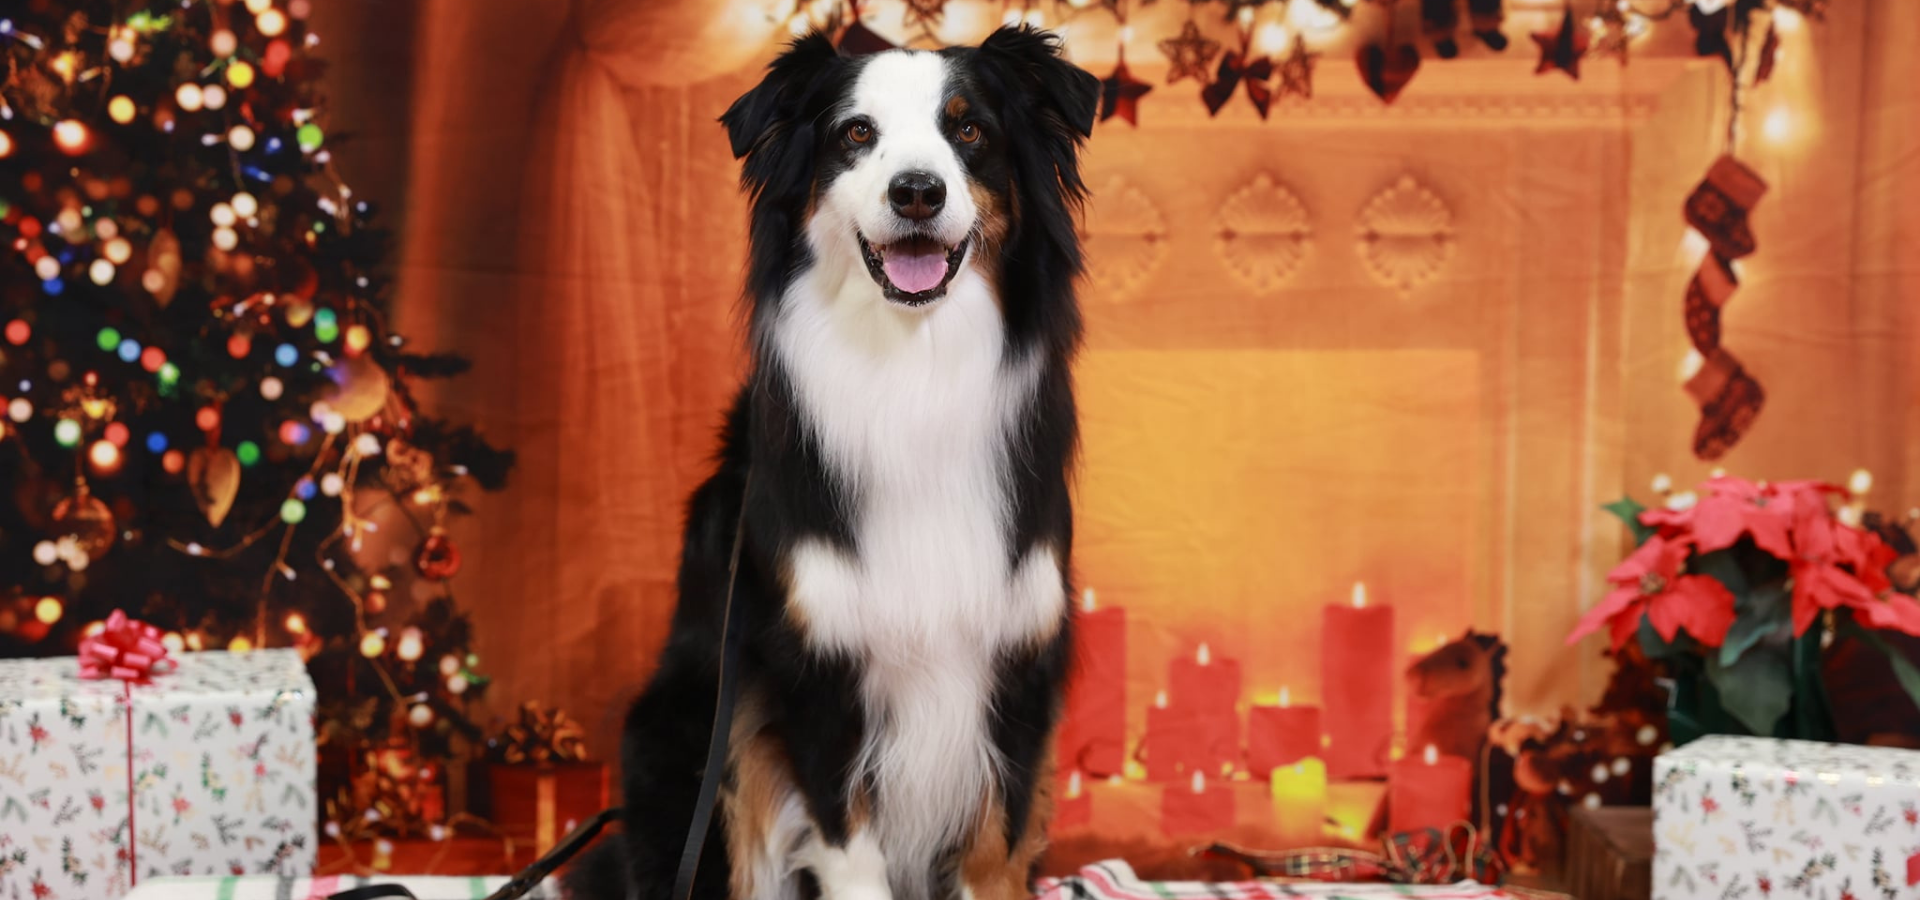 Bordie collie dog posing in front of a Christmas tree for OHS Santa Paws event